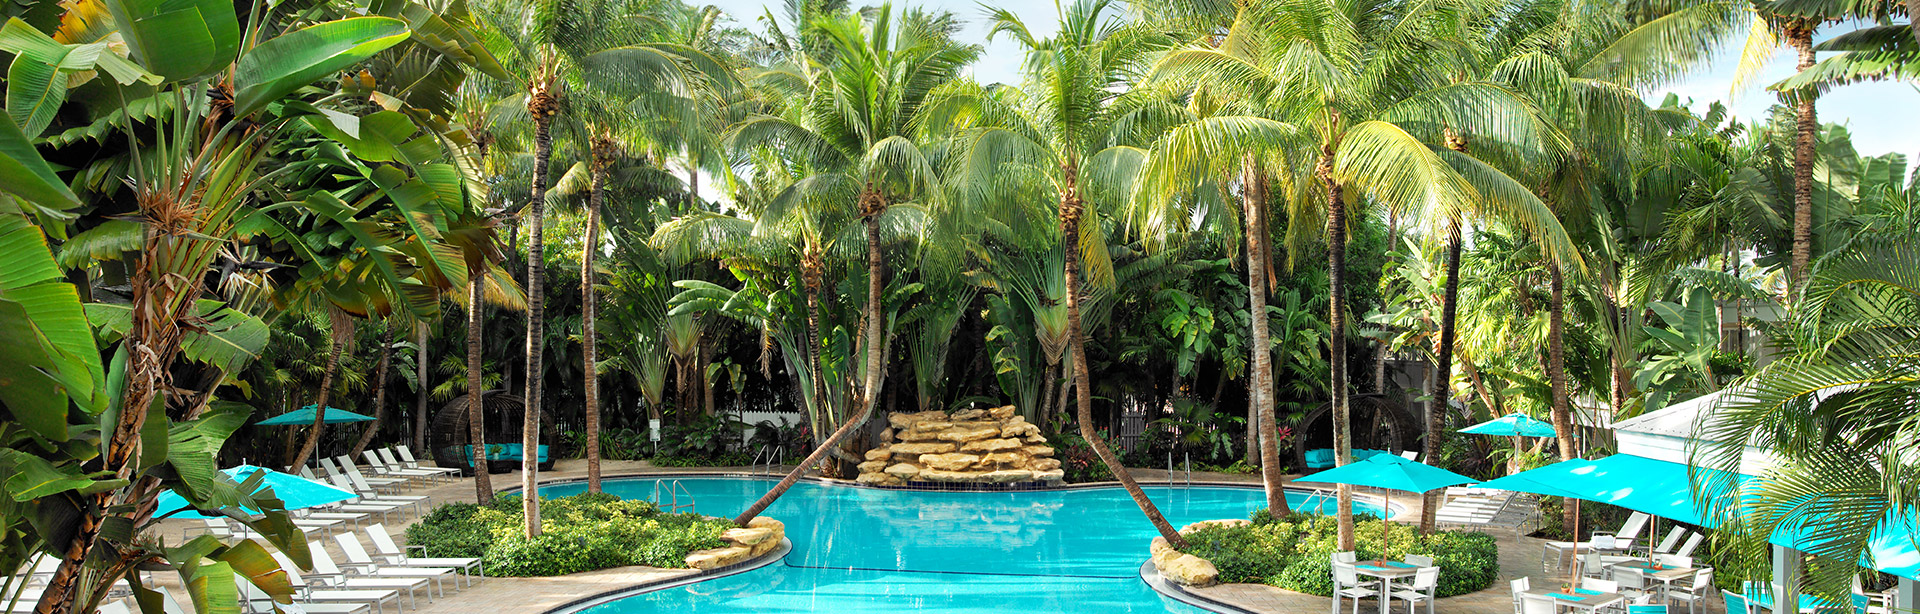 view of an outdoor pool surrounded by many palm trees